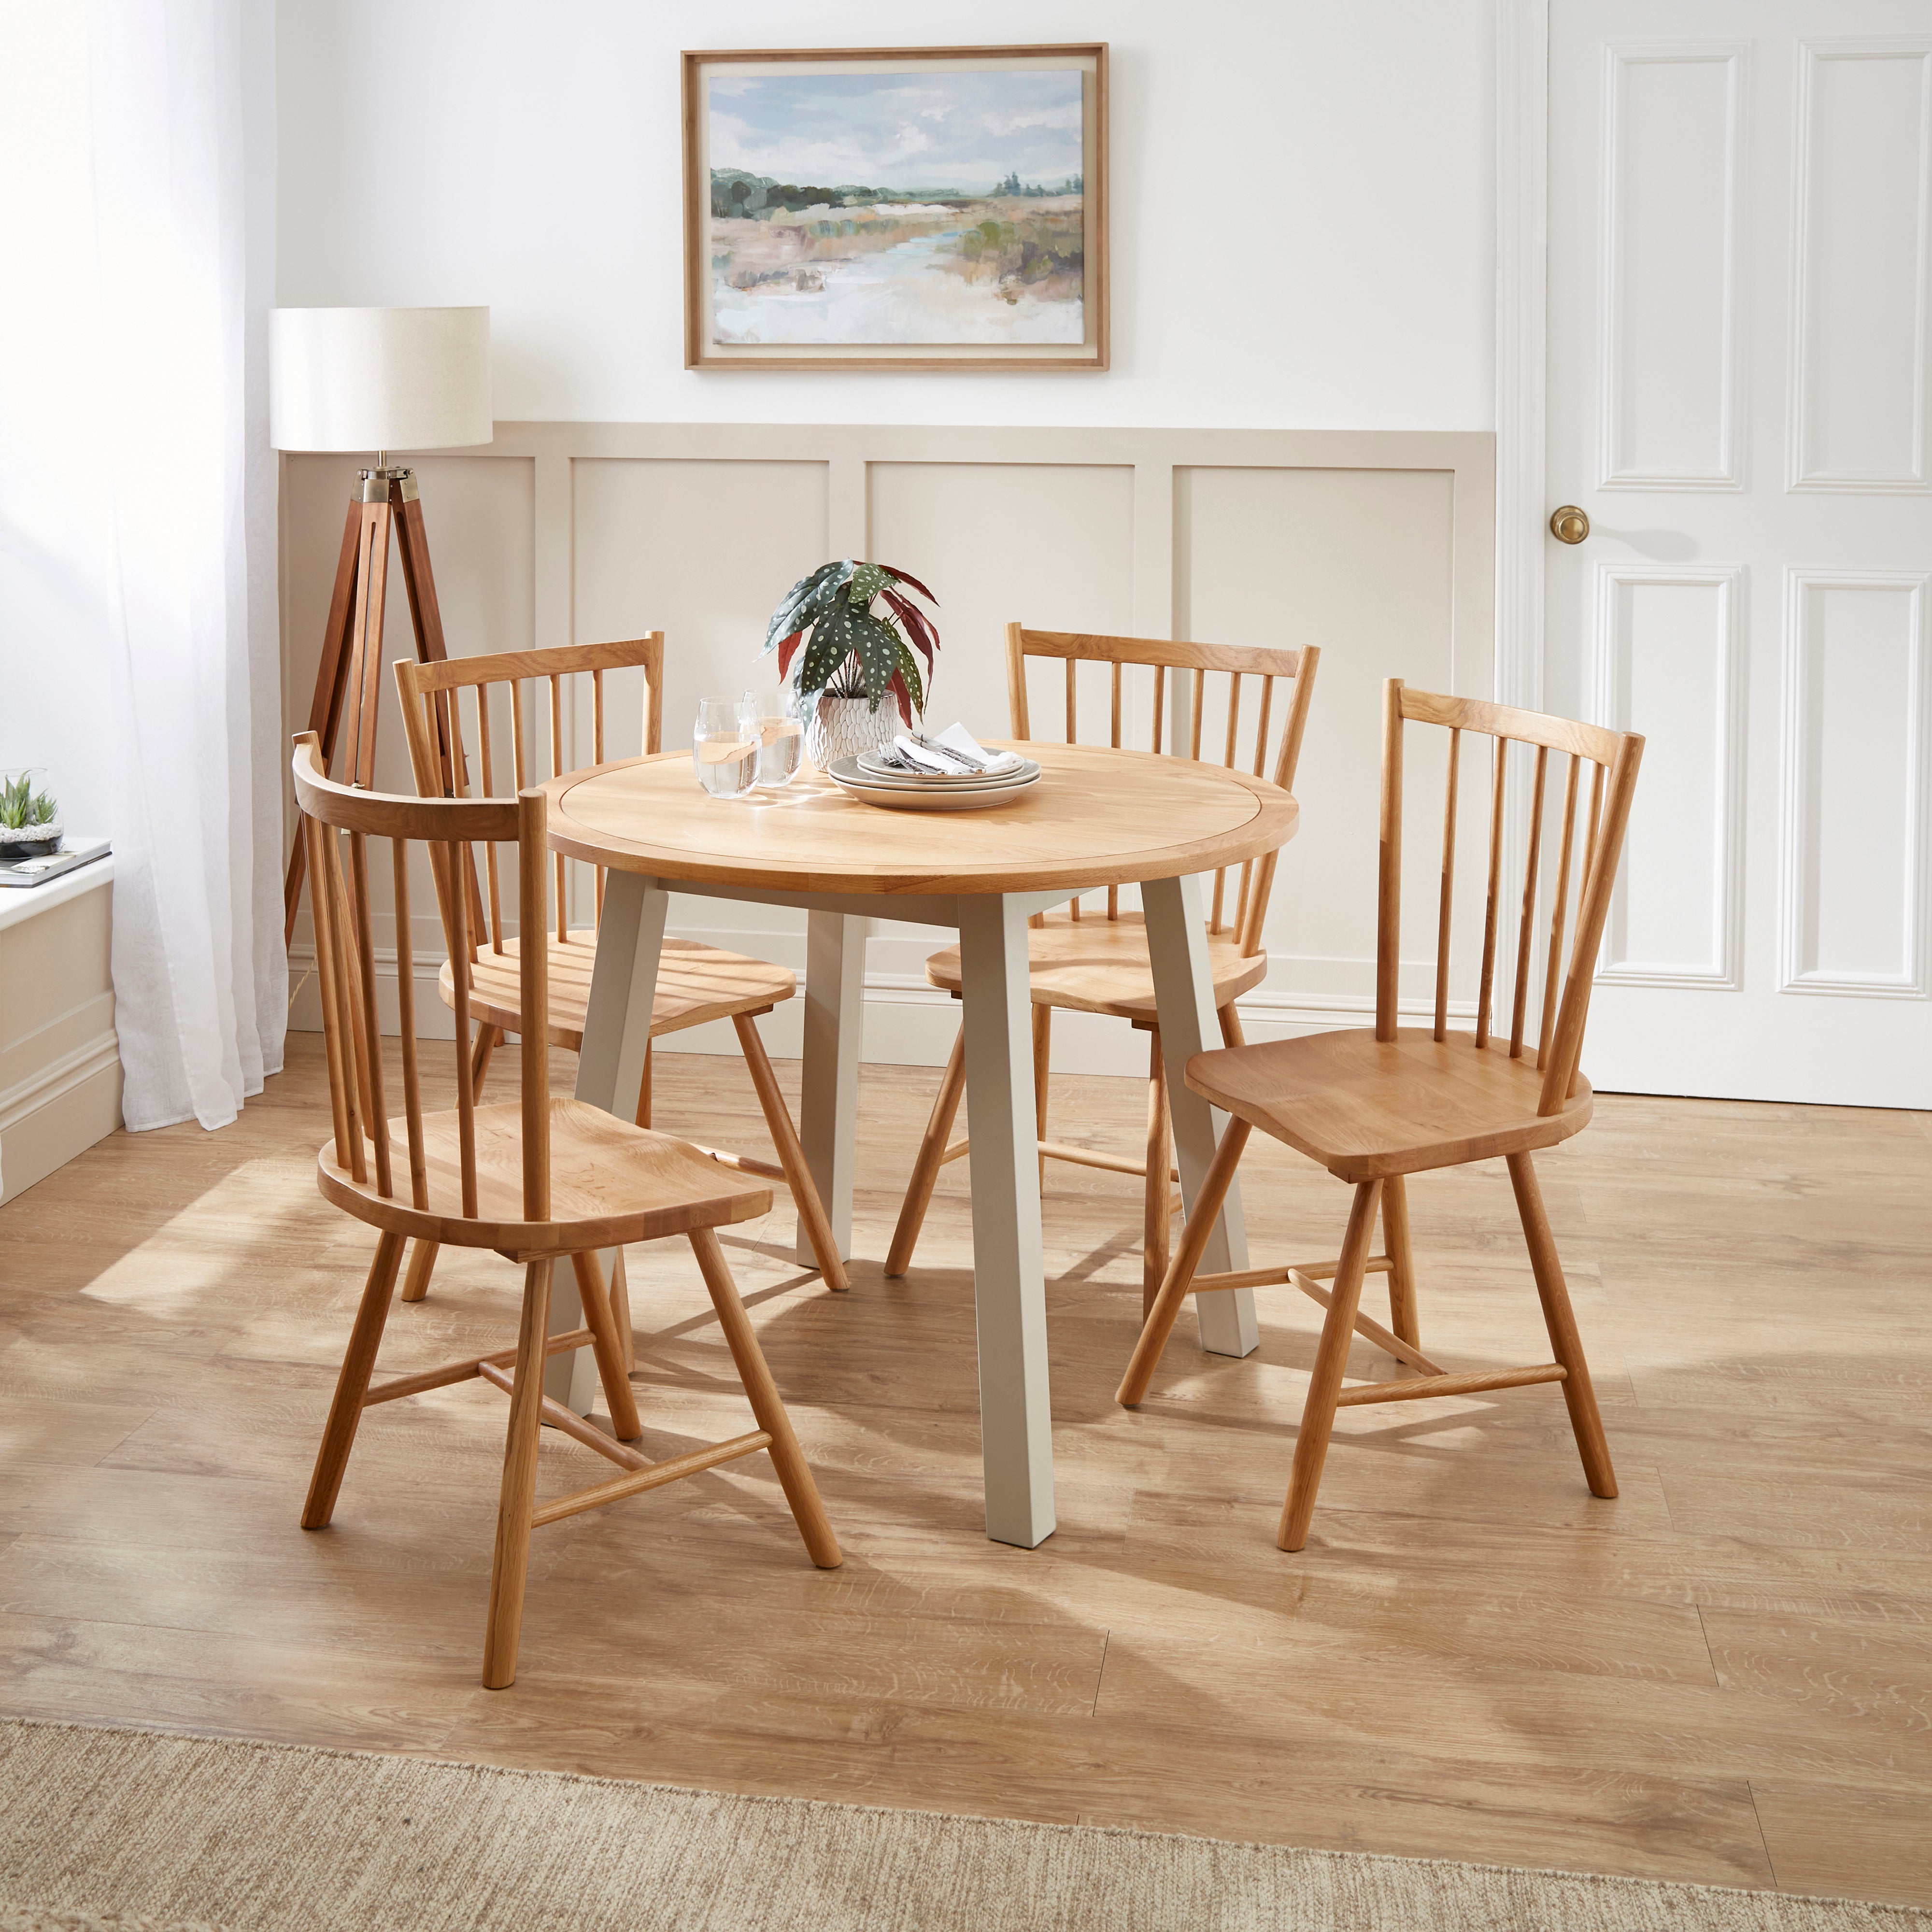 Clifford 4 Seater Round Dining Table